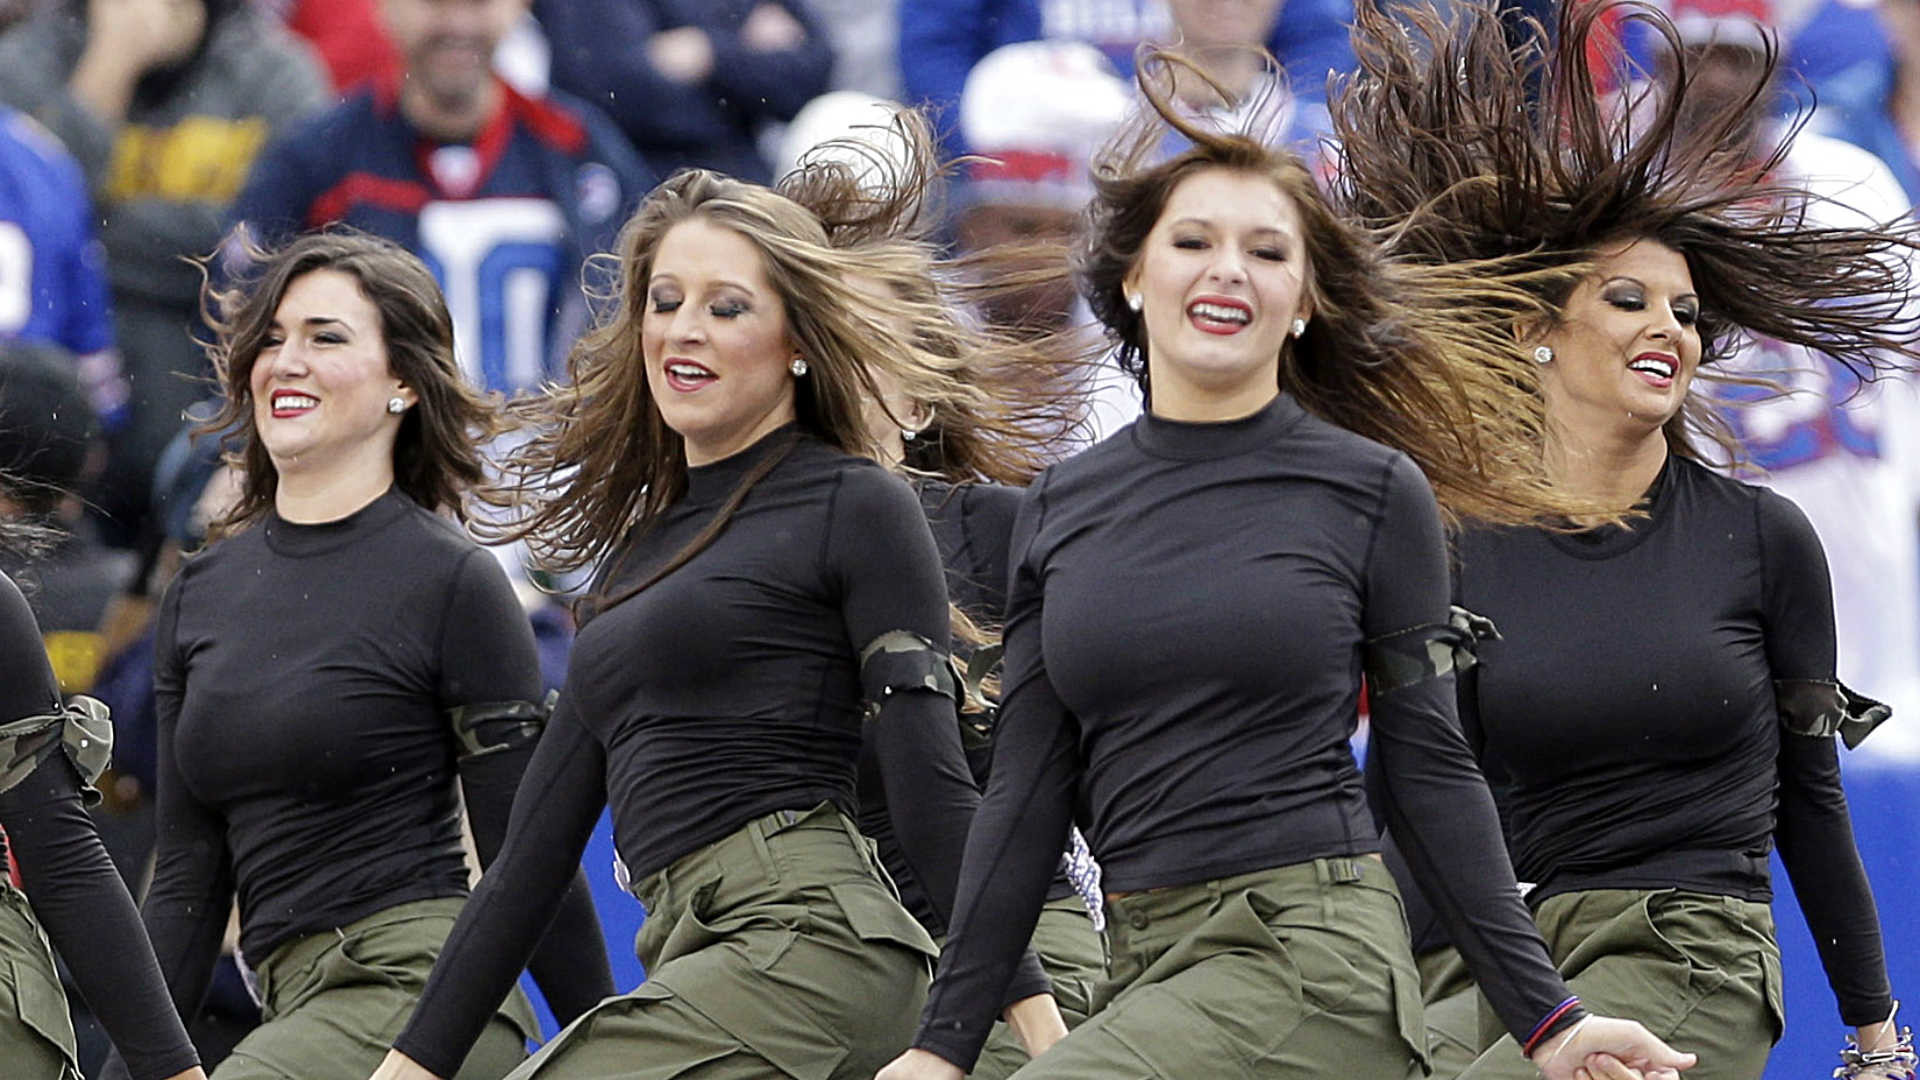 1920x1080 NFL cheerleaders bring in money, but barely paid any | NFL | Sporting News